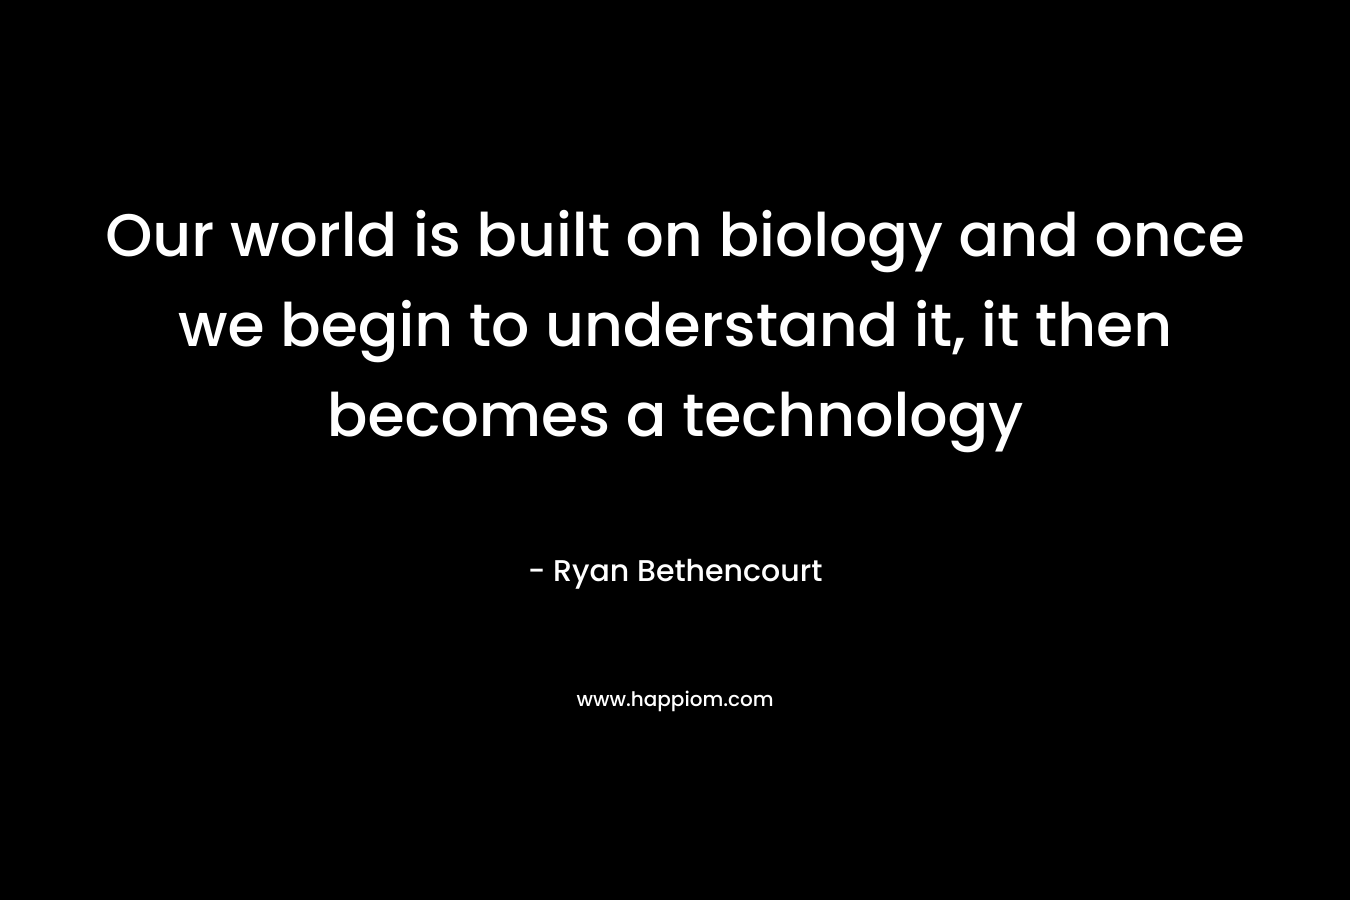 Our world is built on biology and once we begin to understand it, it then becomes a technology